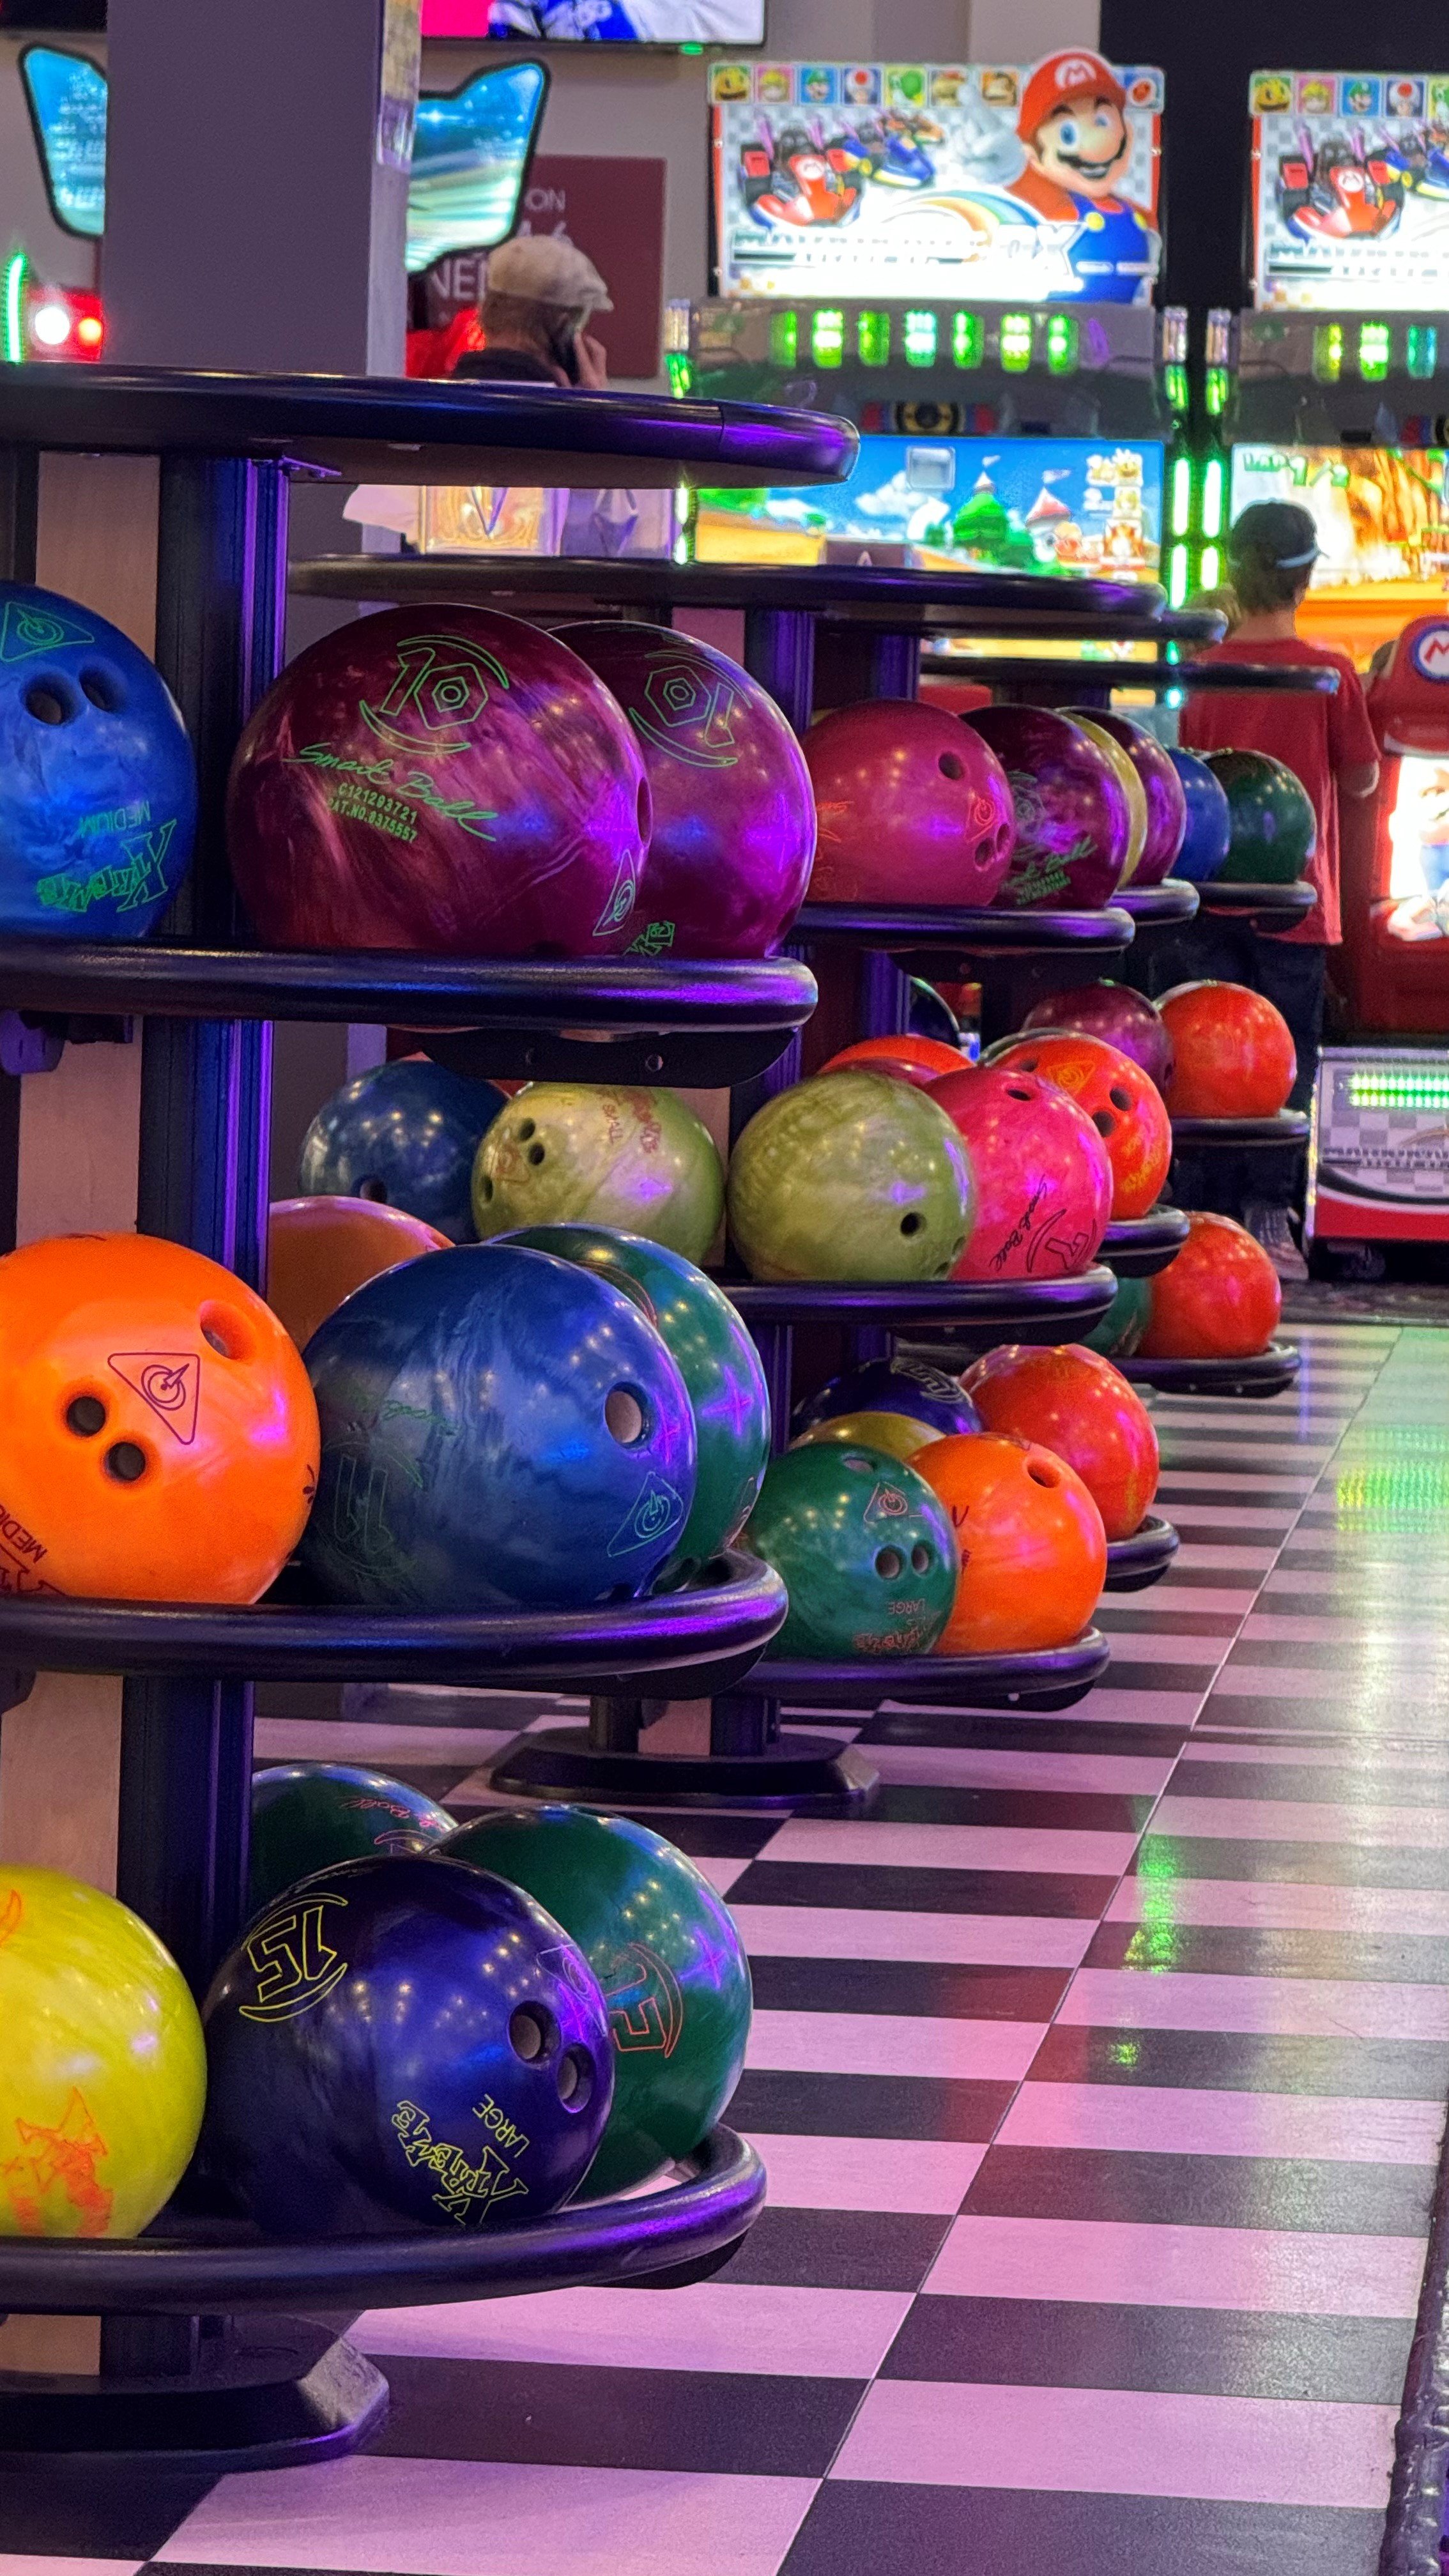 bowling arcade picture.jpg